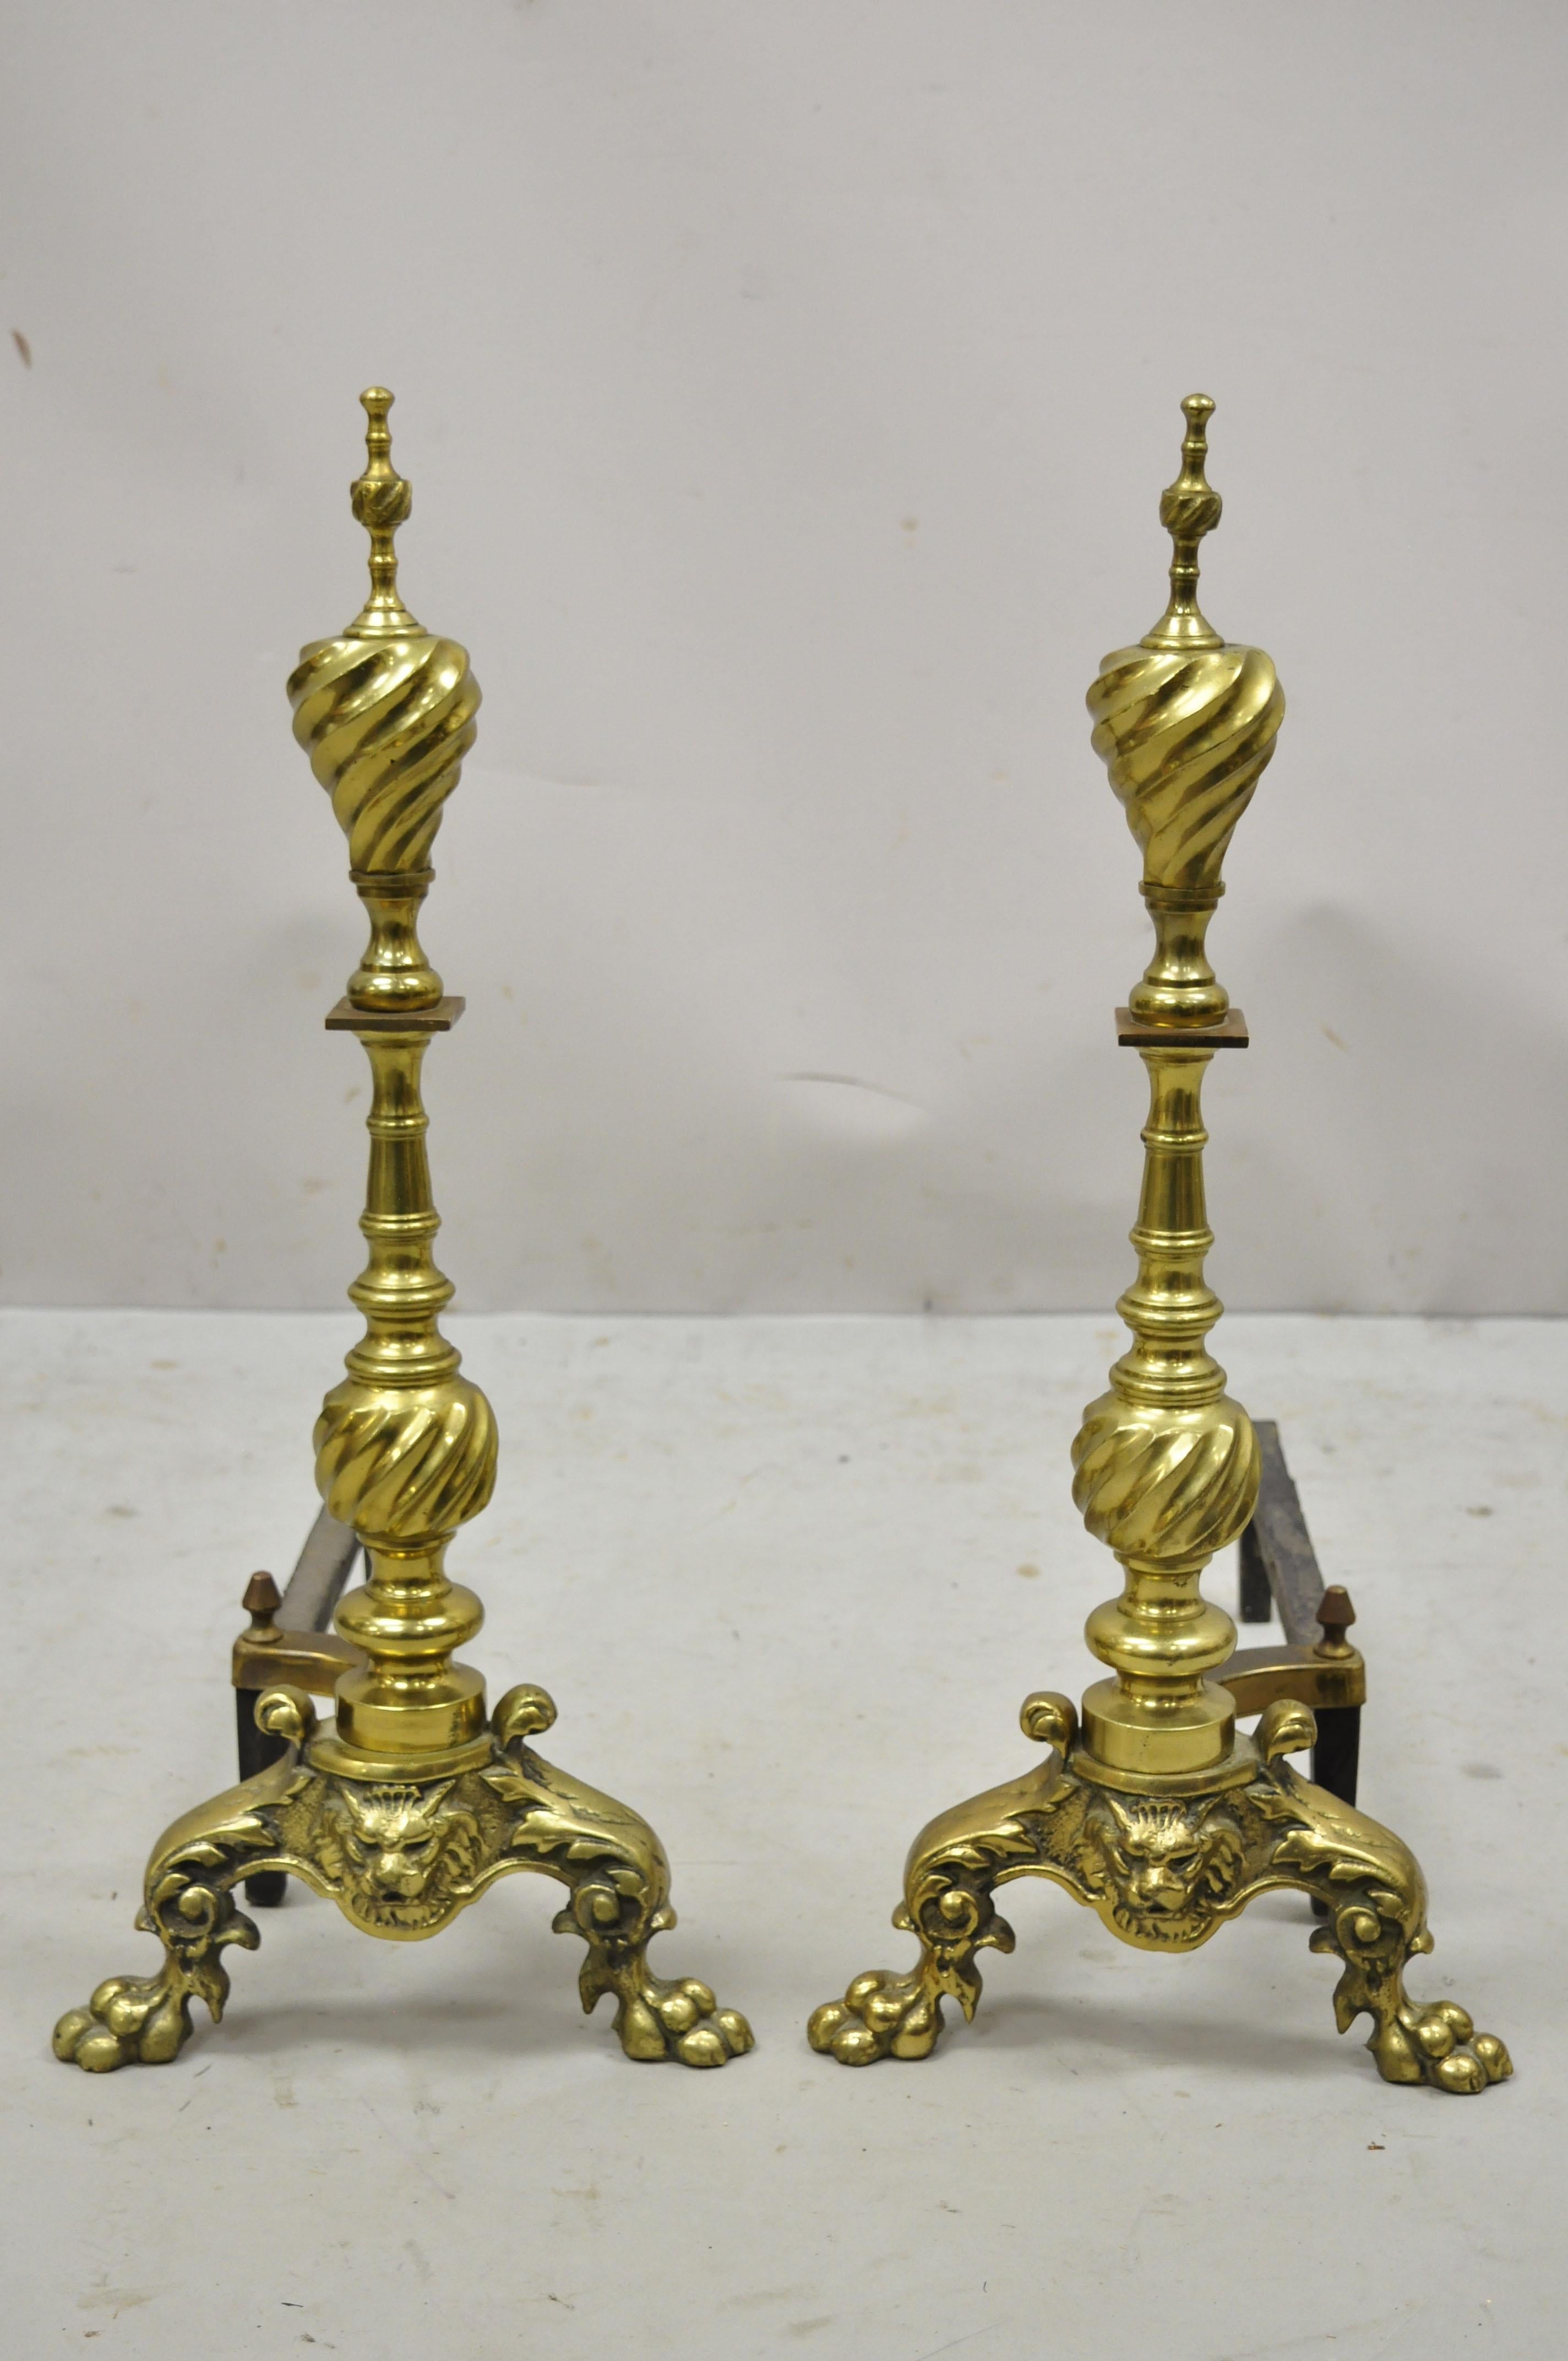 Antique French empire style brass cast iron lion head spiral twist paw feet andirons - a pair. Item features brass spiral turned column and finials, cast iron supports, lions heads to base, paw feet, very nice antique pair, great style and form.